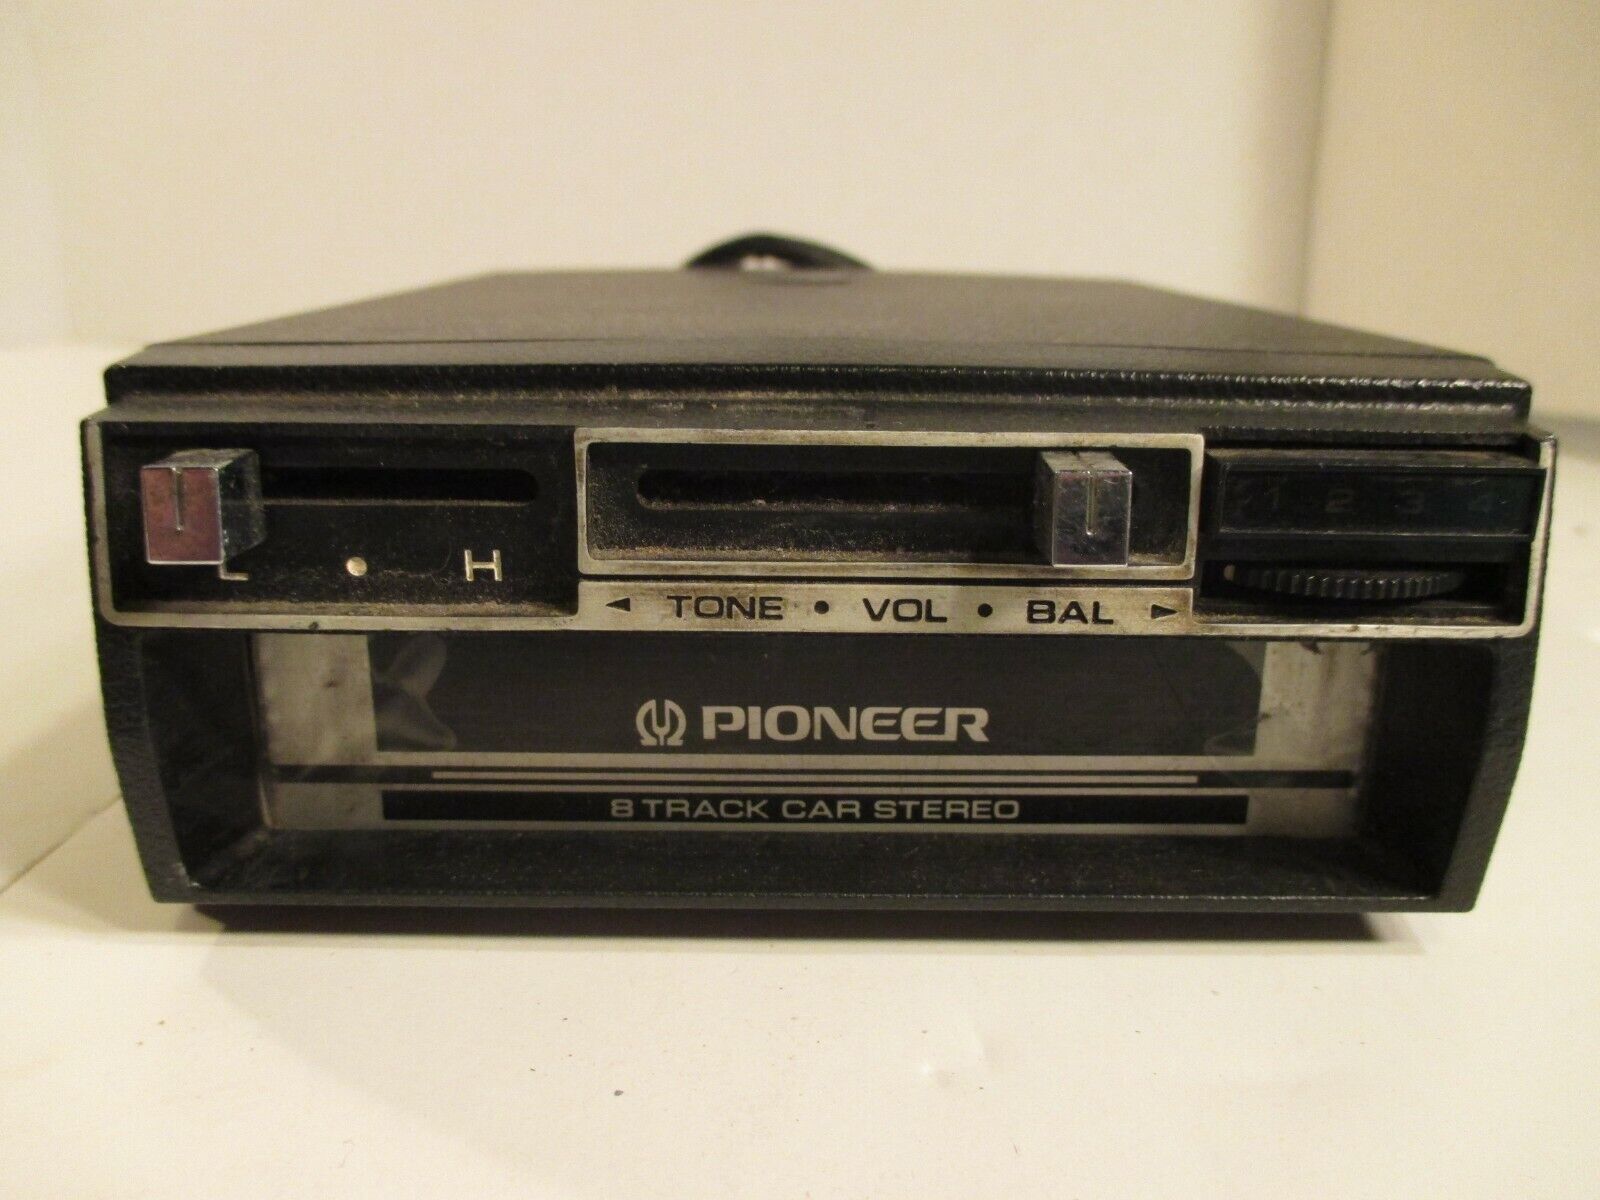 Pioneer TP-252 8-Track Car Stereo Tape Player   Untested  as is 